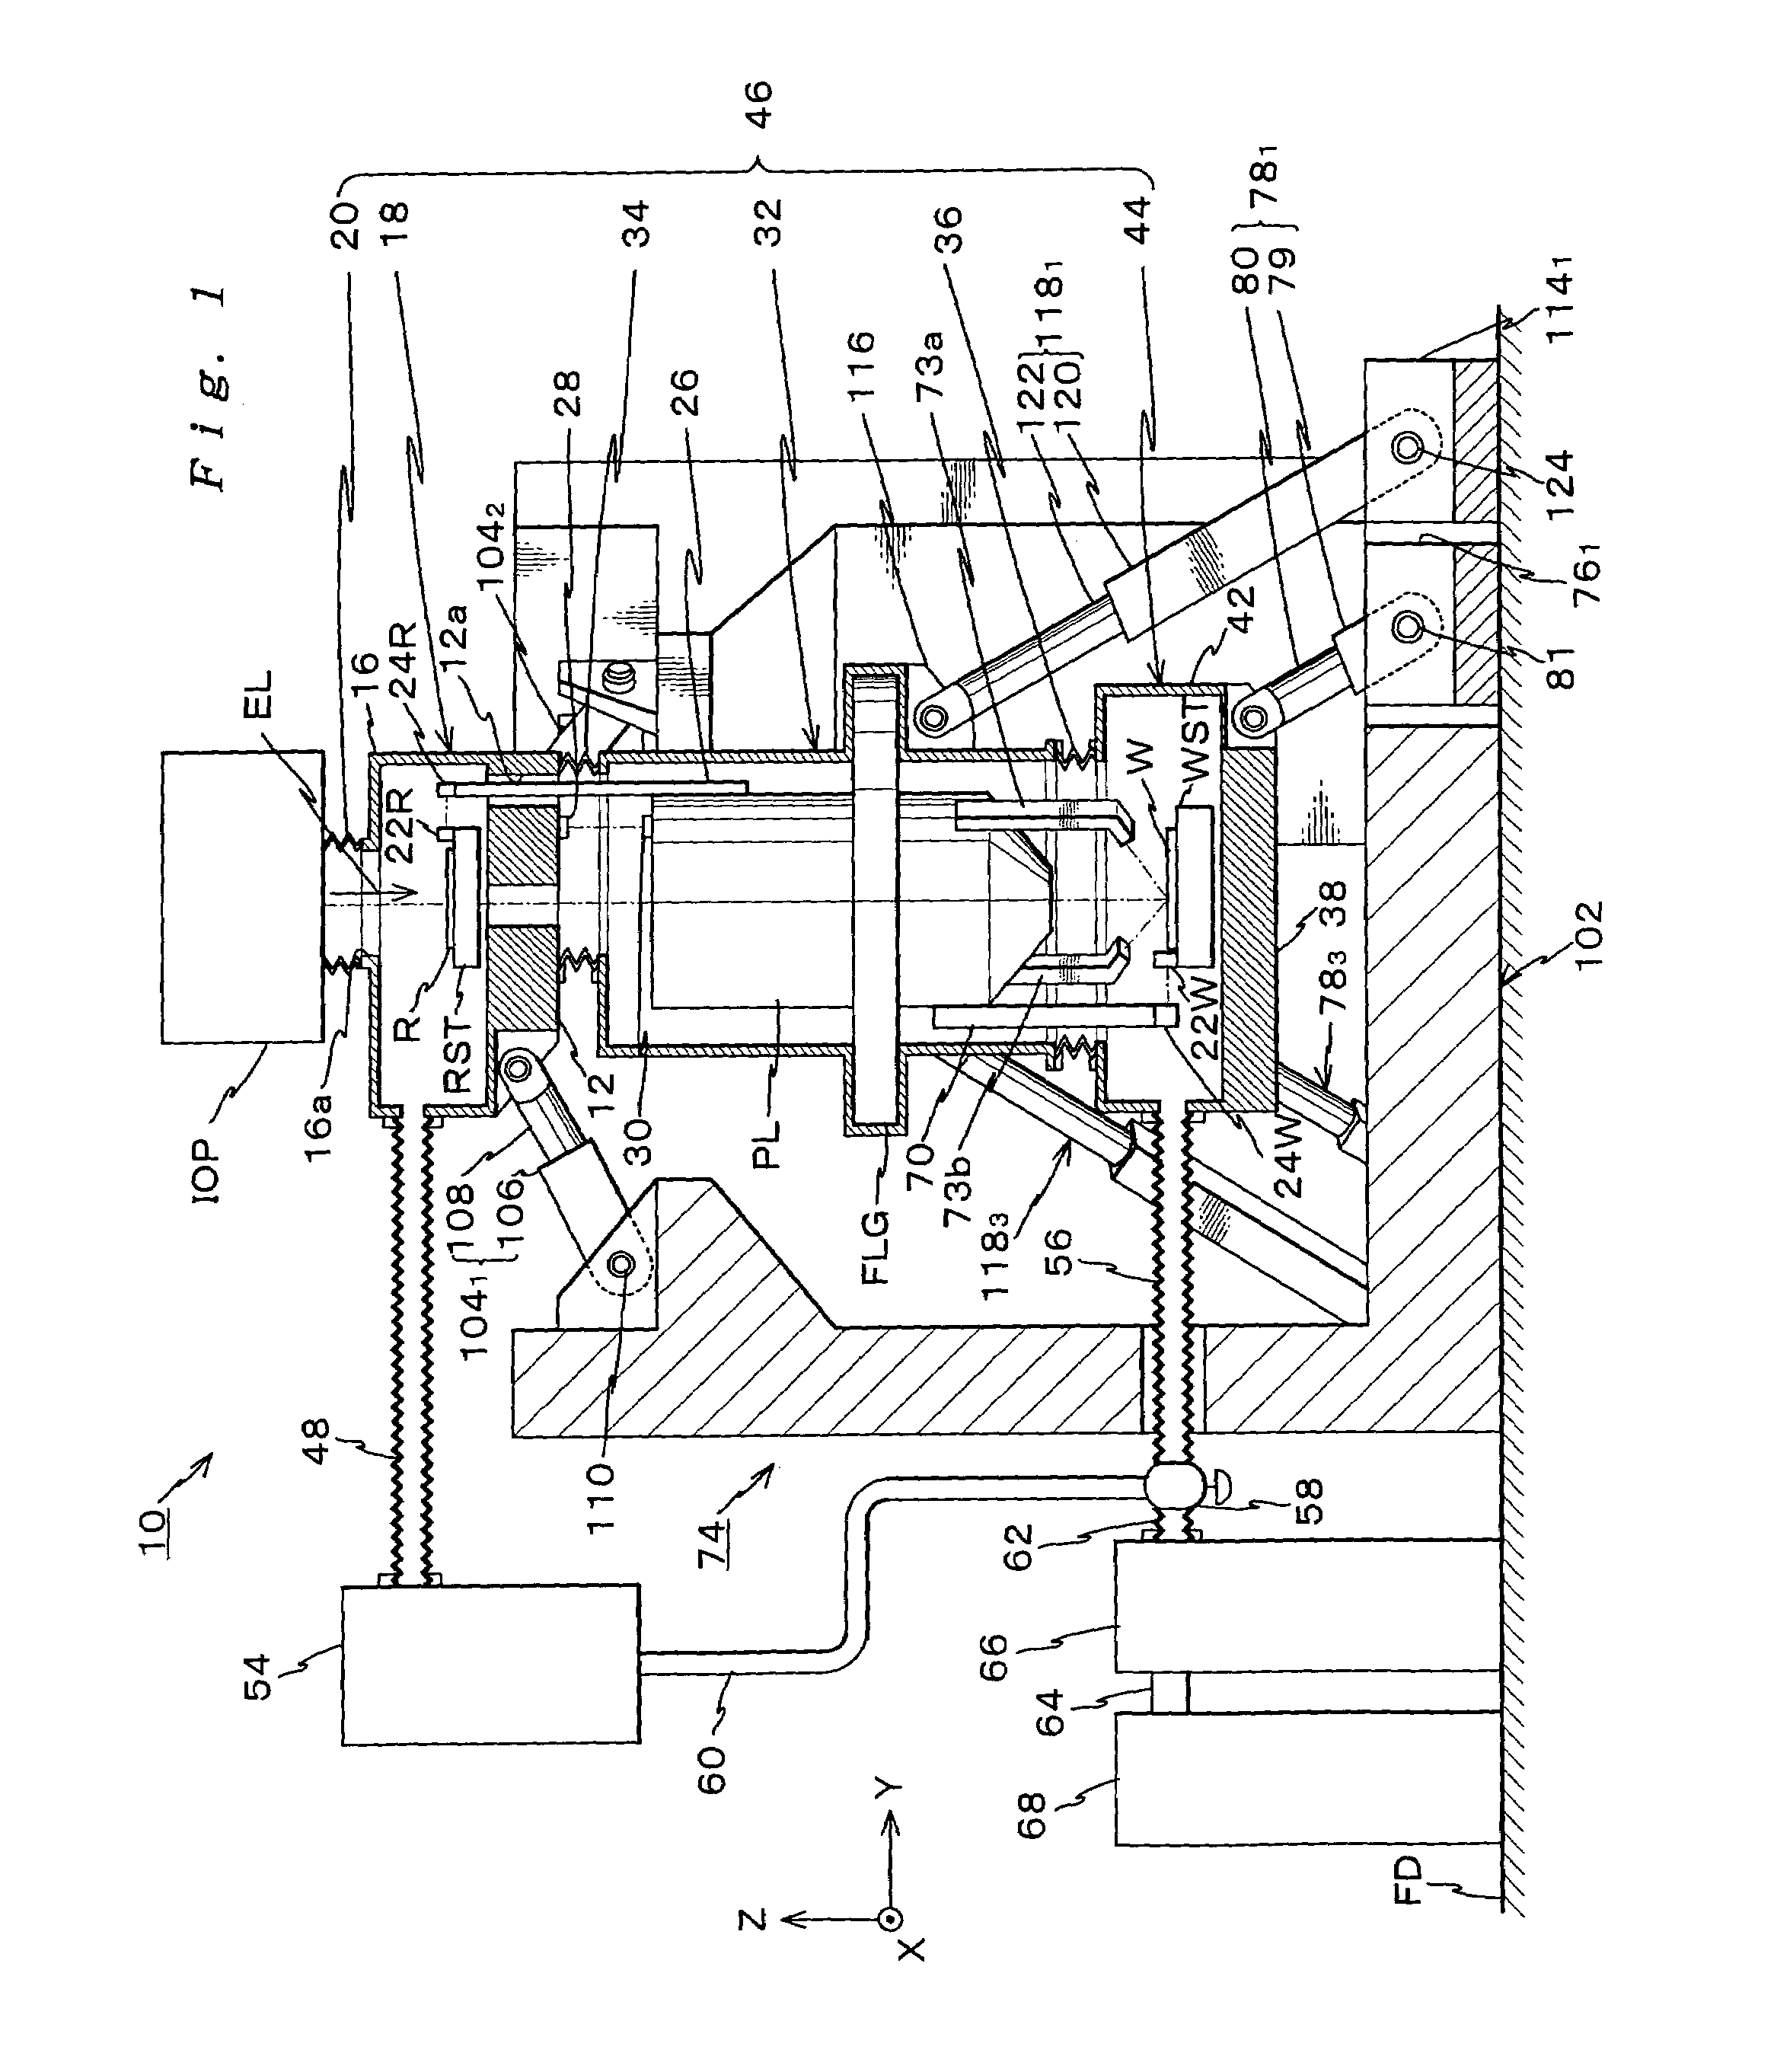 Parallel link mechanism, exposure system and method of manufacturing the same, and method of manufacturing devices